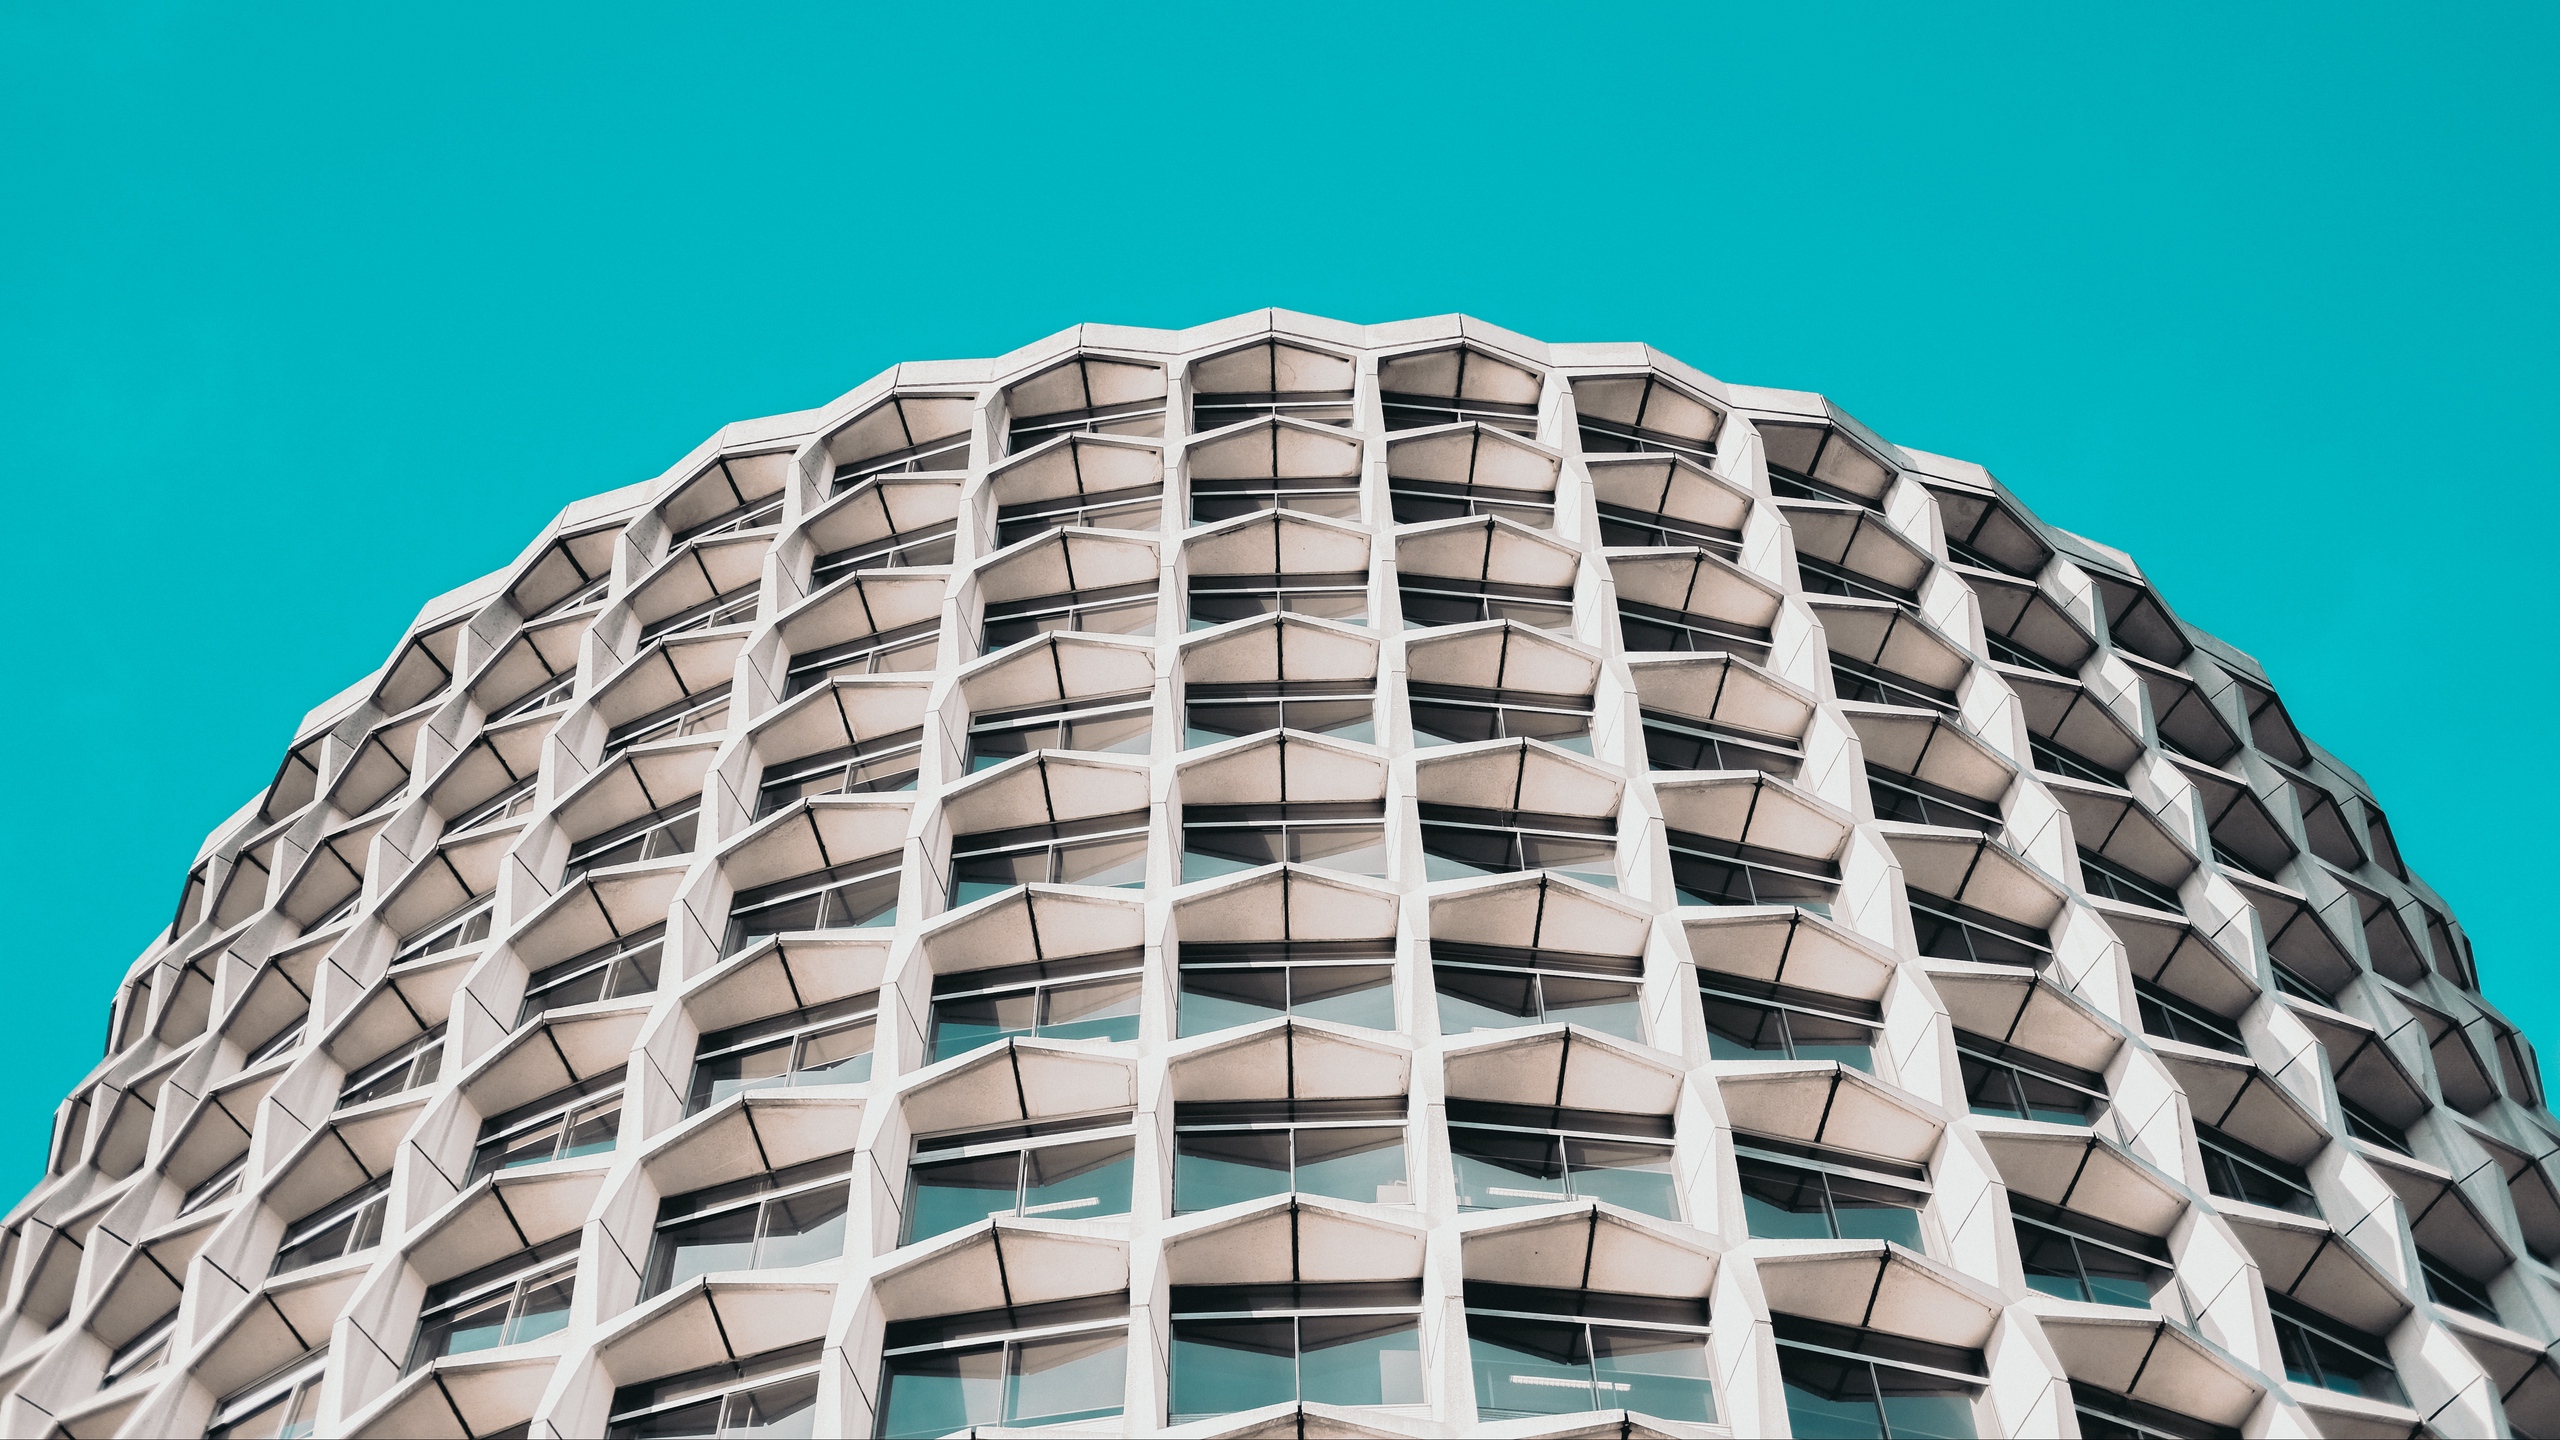 General 2560x1440 architecture building clear sky low-angle symmetry cyan daylight